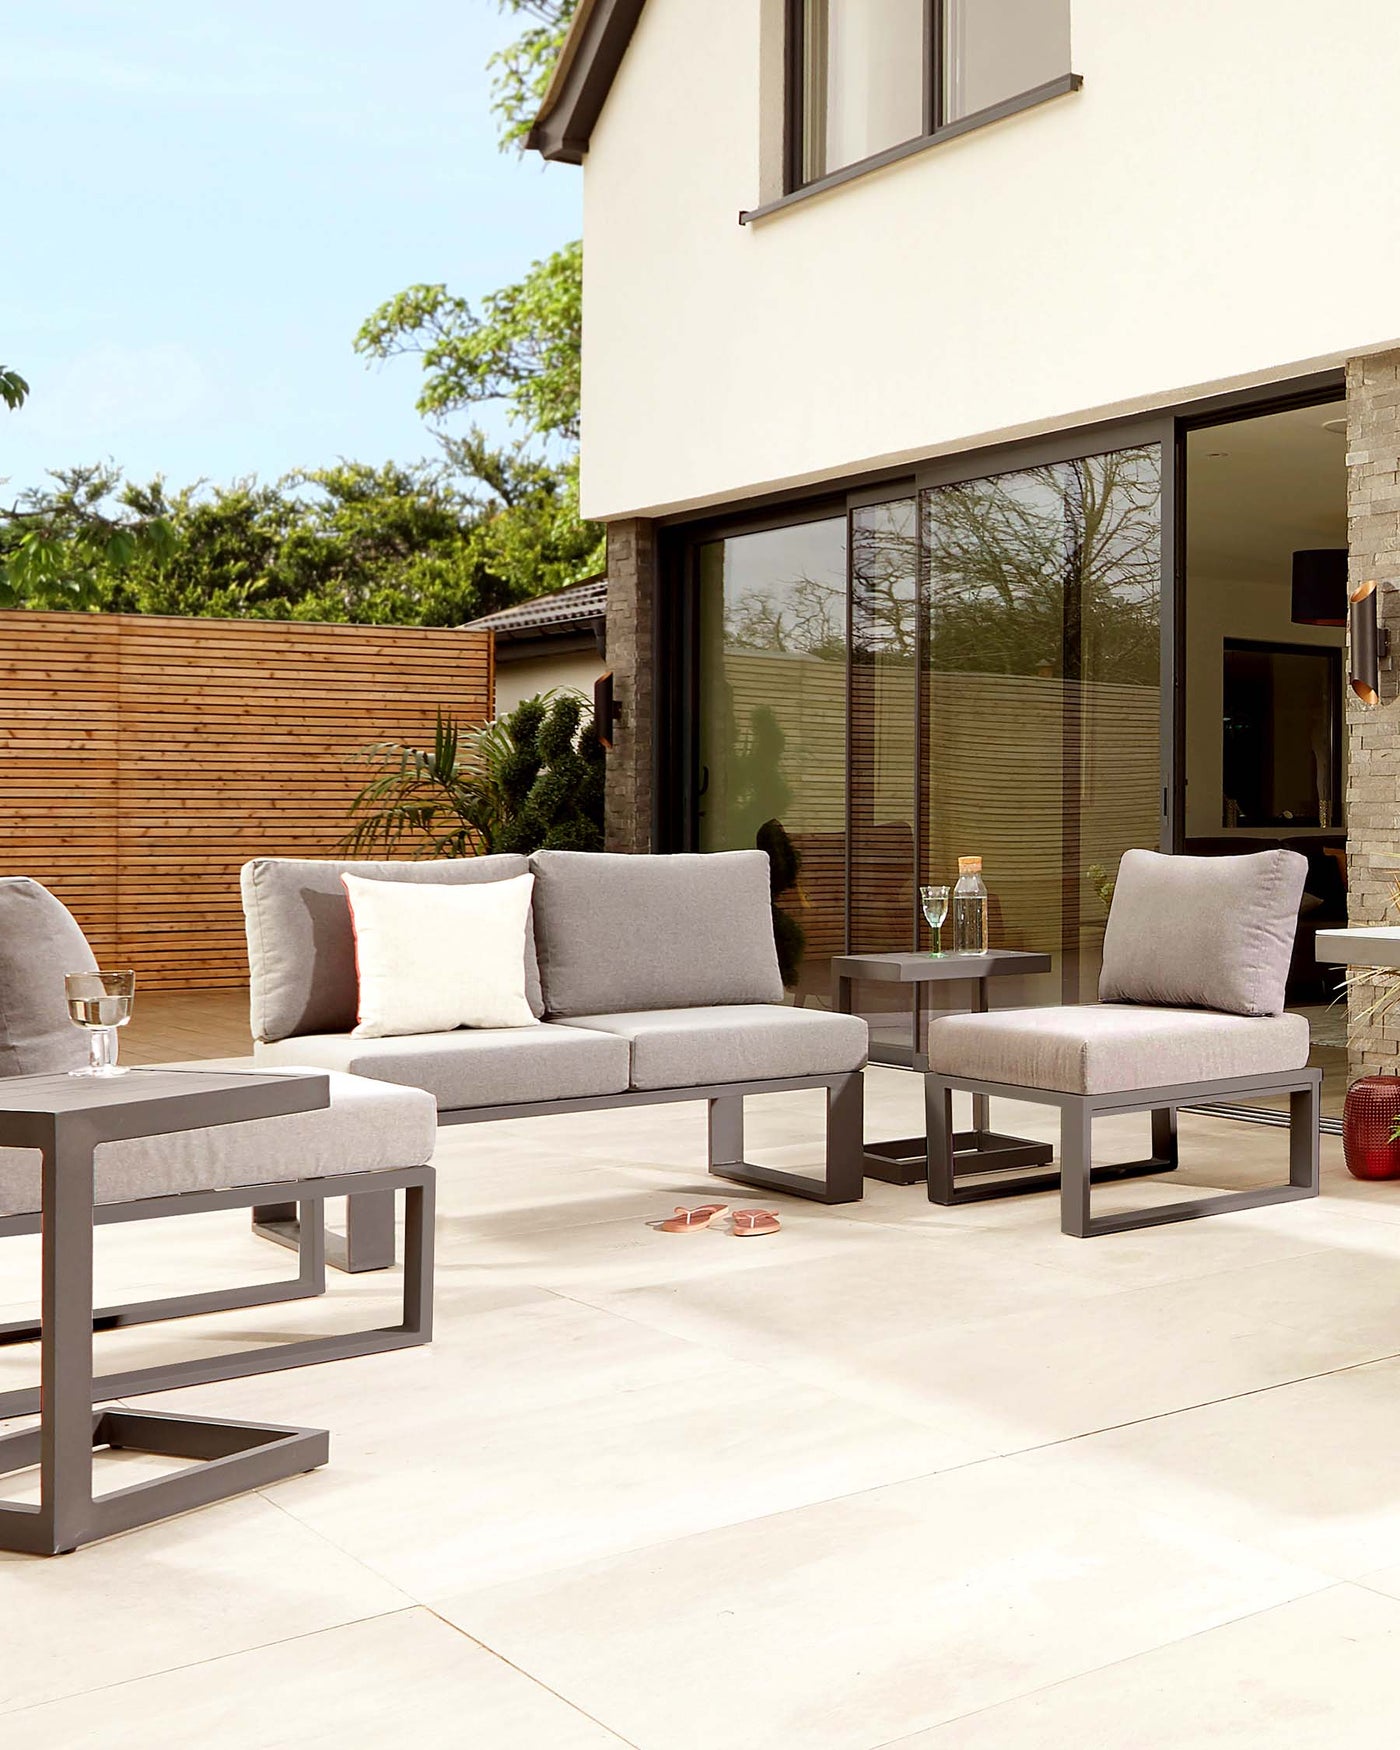 Modern outdoor furniture consisting of two grey upholstered single-seat lounge chairs with backrests, one double-seat lounge chair with a matching backrest, and a rectangular low-profile coffee table with a flat grey surface, all with a sleek dark grey metal frame. The set is arranged on a beige tiled patio, and decorative cushions and a carafe with glasses complete the scene.